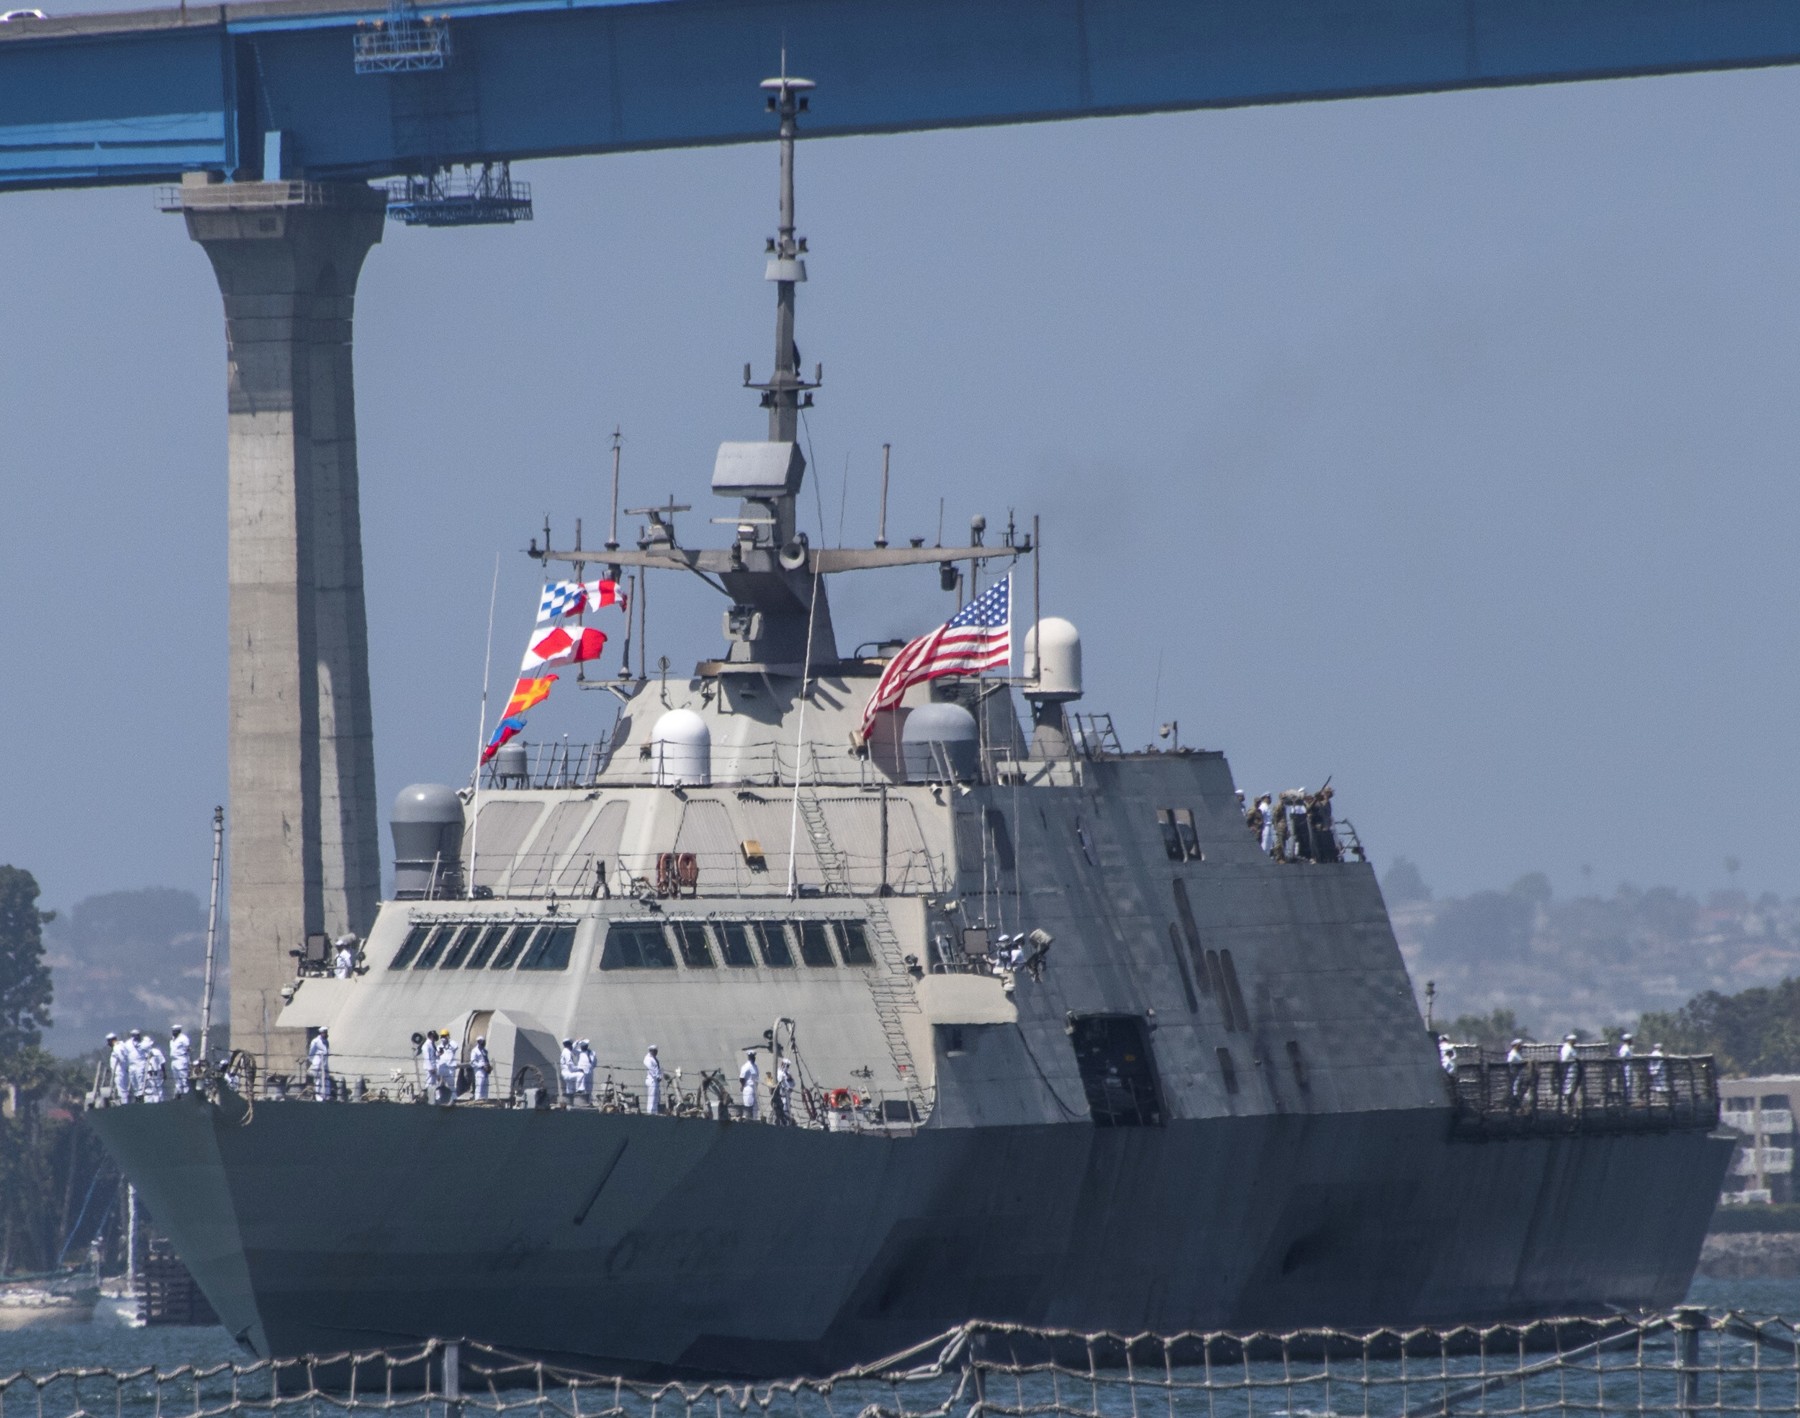 lcs-1 uss freedom class littoral combat ship us navy final homecoming deployment san diego 177